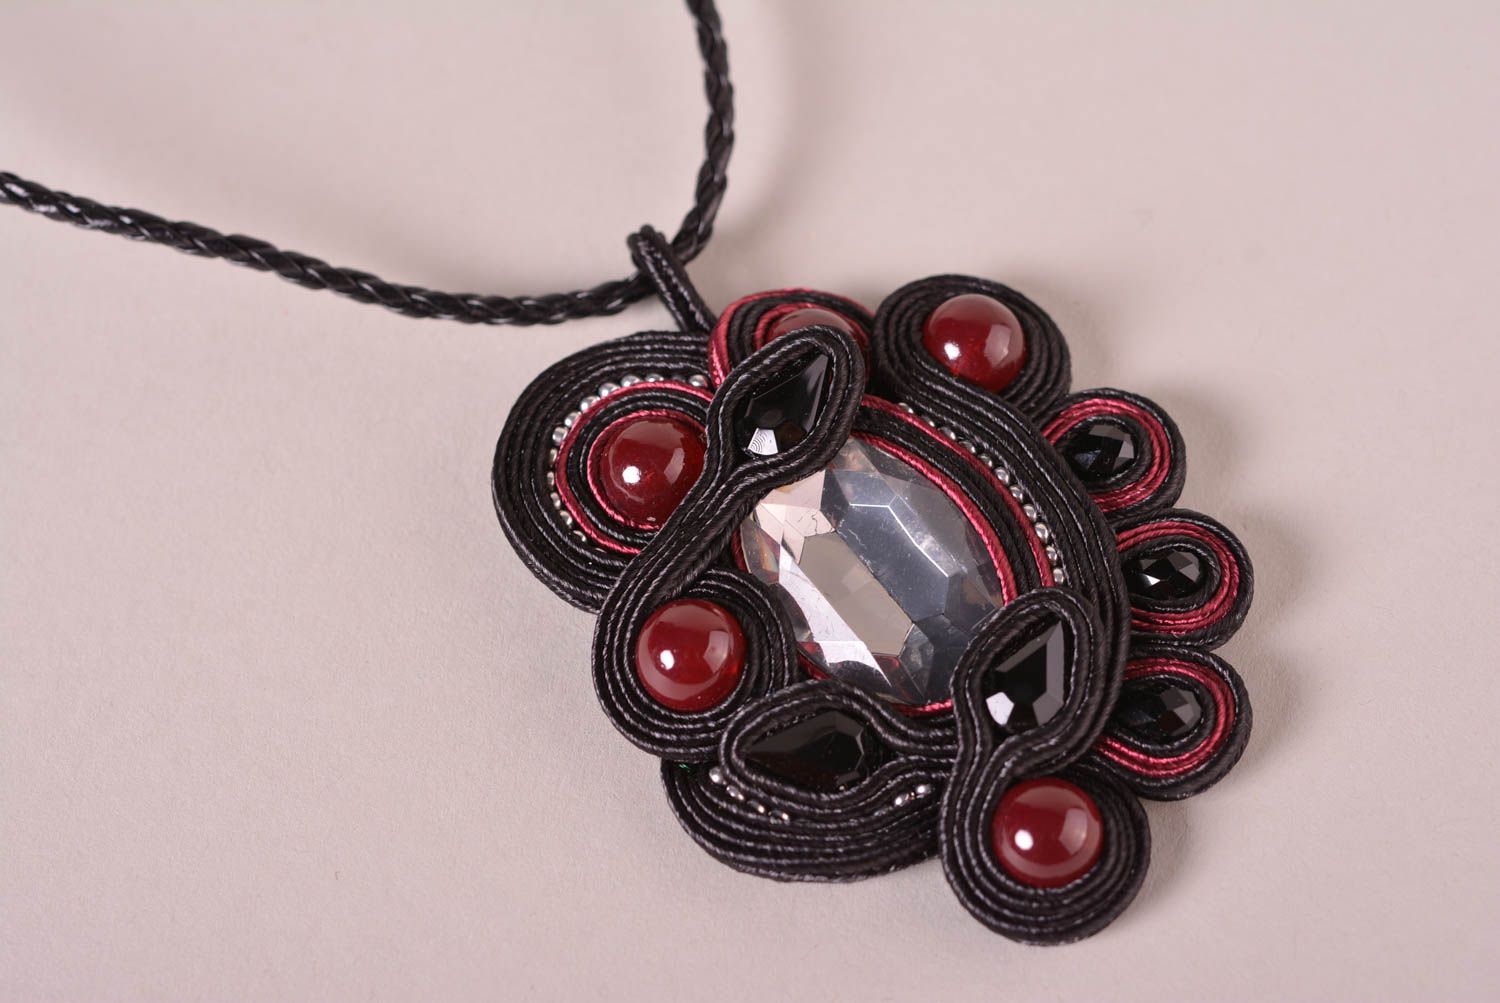 Handmade necklace soutache pendant necklace designer jewelry gifts for women photo 3